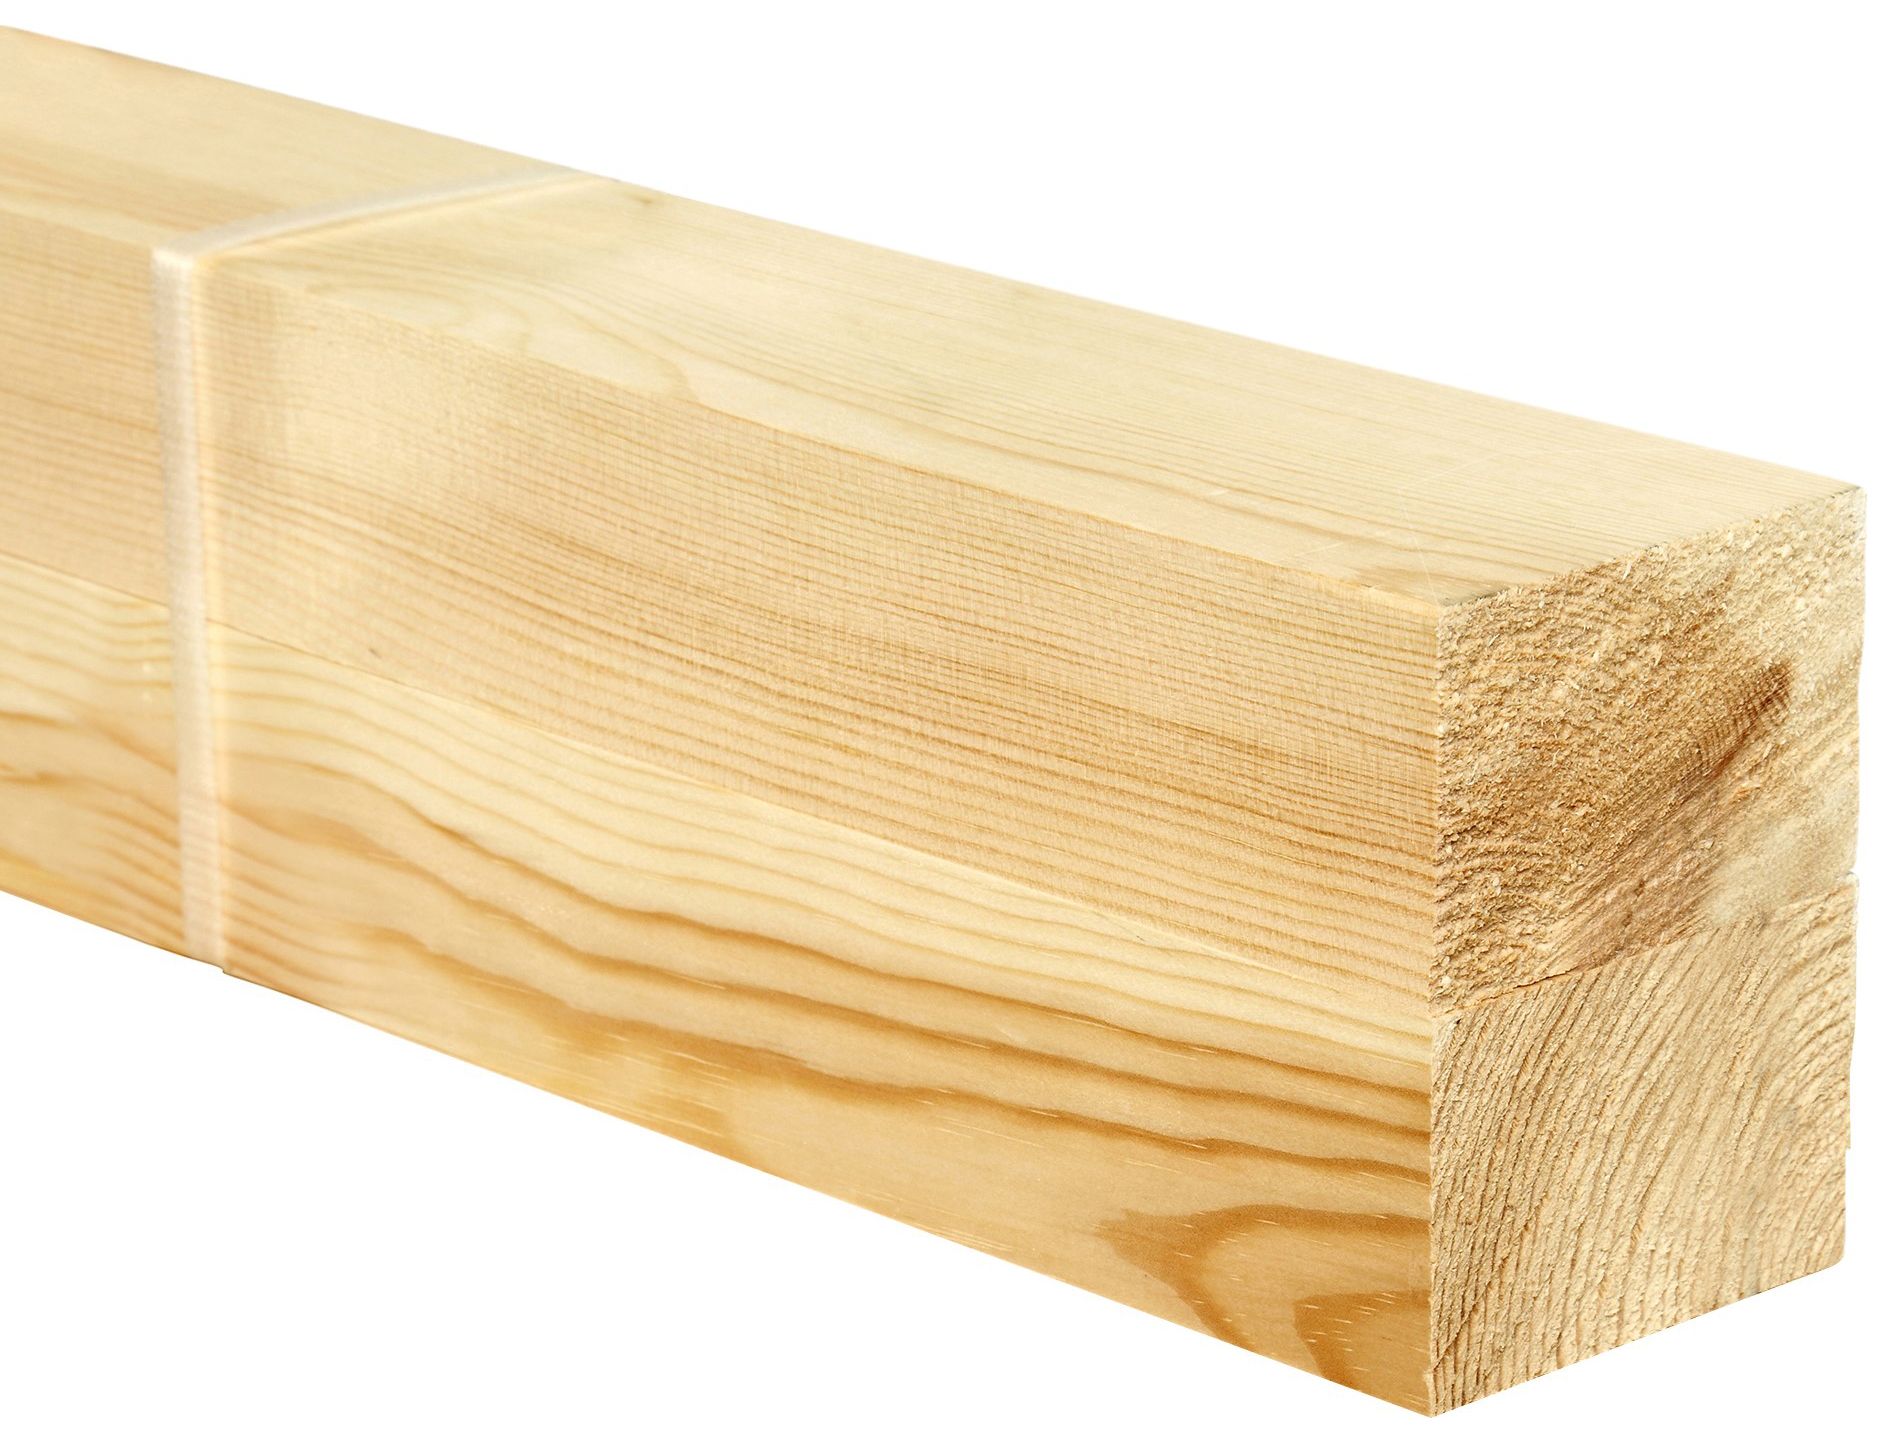 Image of Wickes Redwood PSE Timber - 44 x 69 x 2400mm - Pack of 2